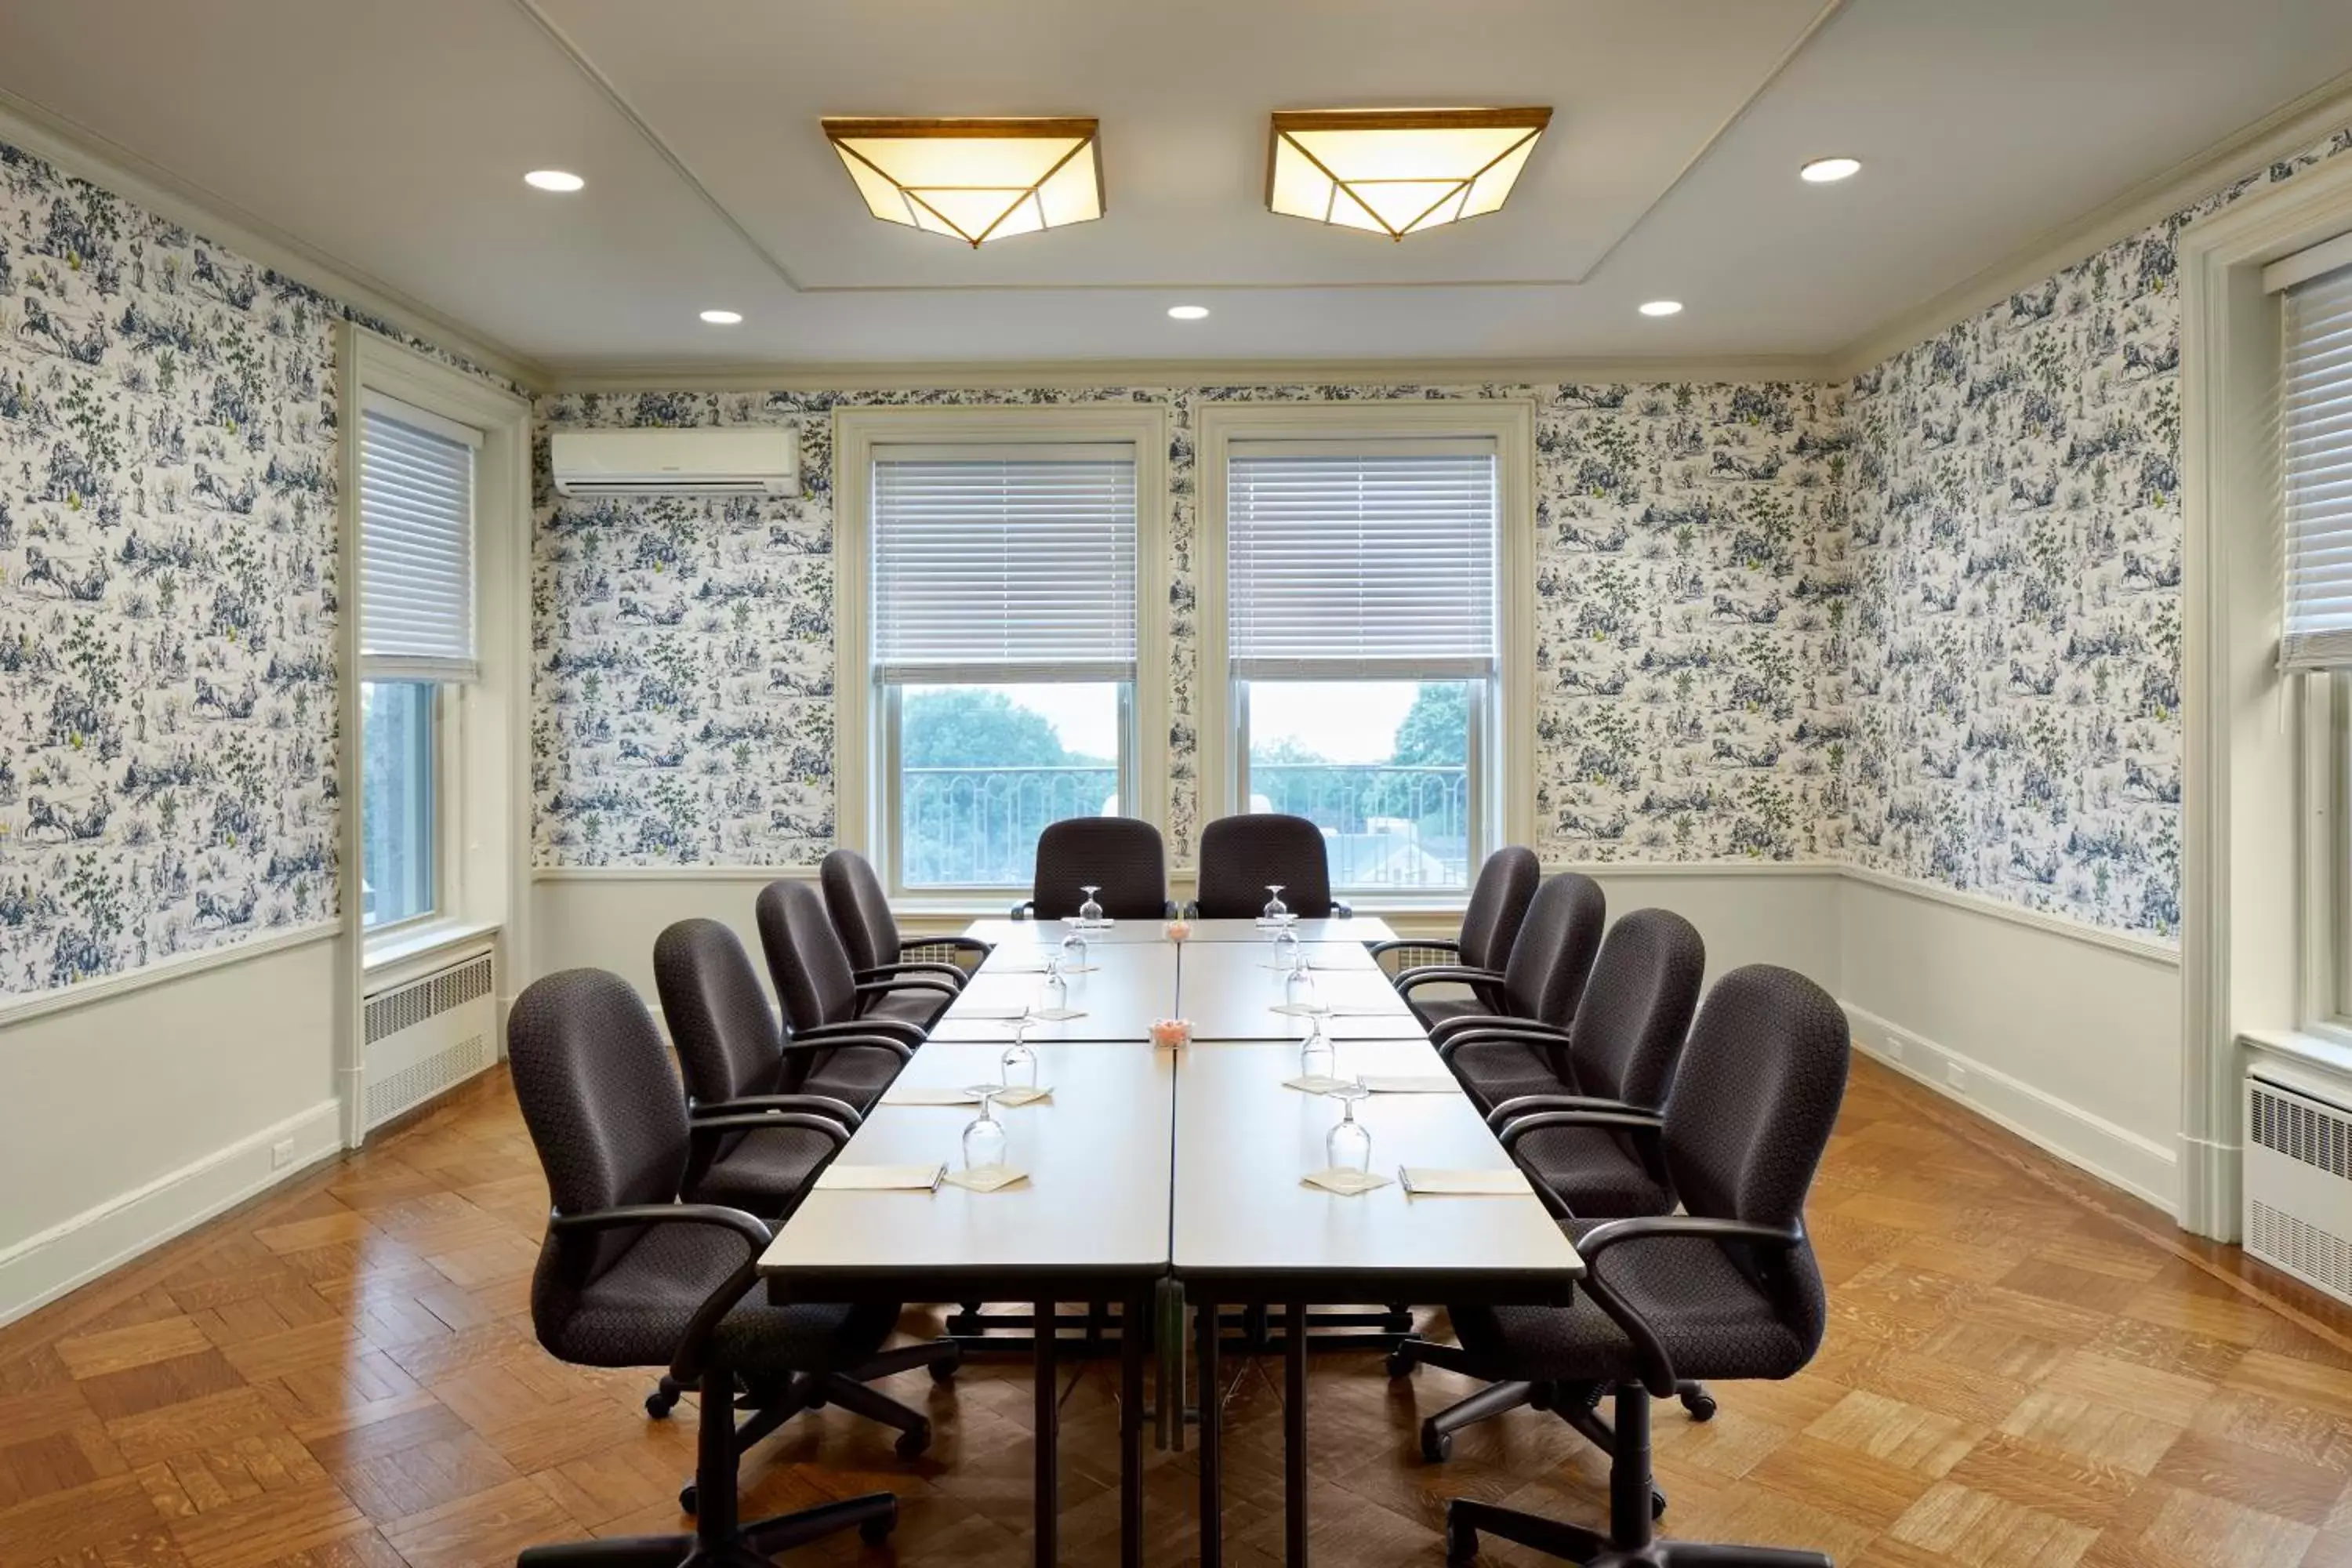 Meeting/conference room in Tarrytown House Estate on the Hudson